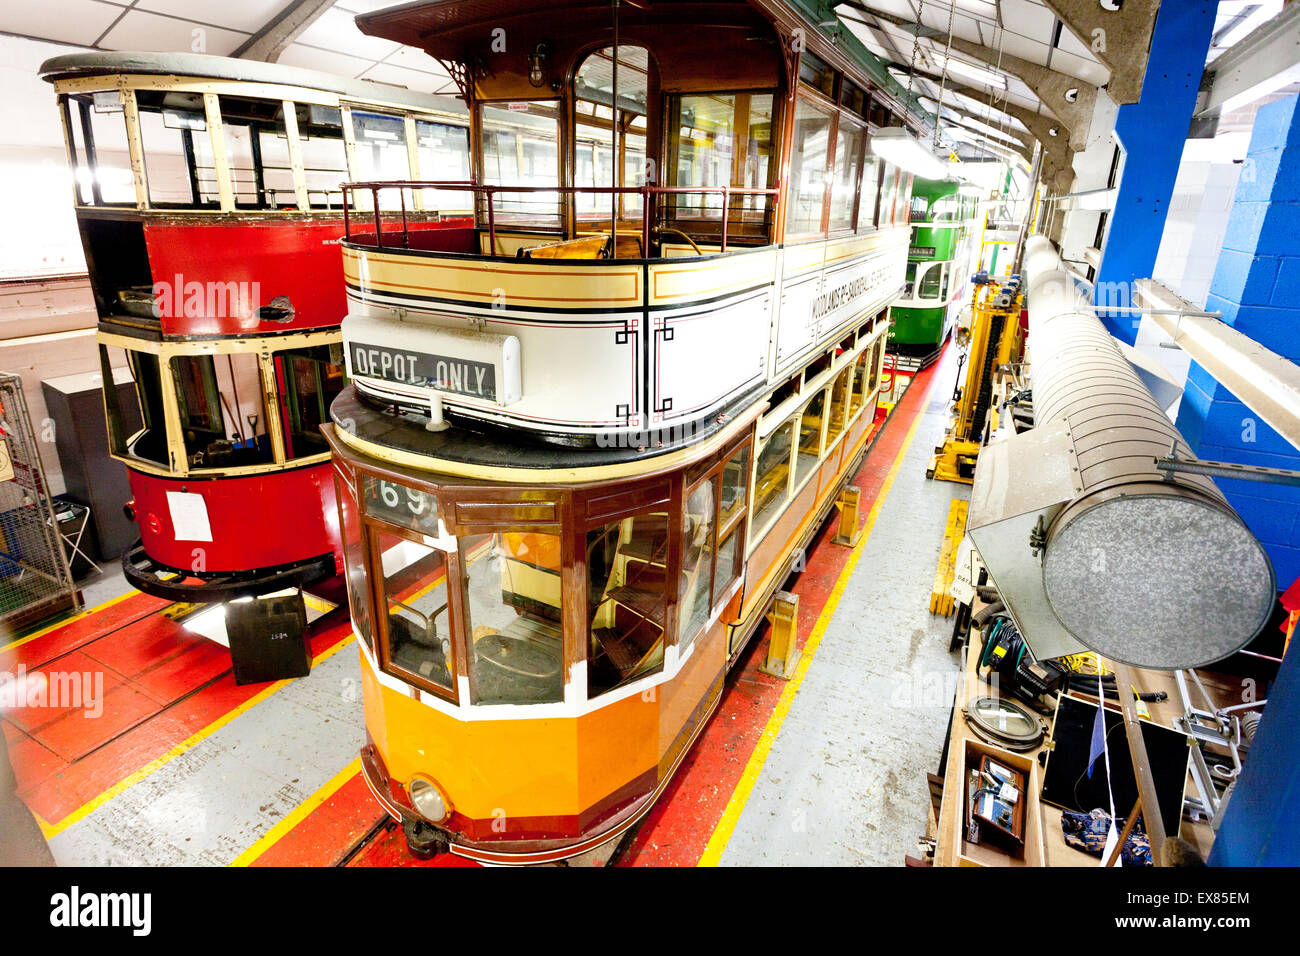 A Glasgow tram from 1922 in the workshops at the National Tramway Museum, Crich, Derbyshire, UK Stock Photo